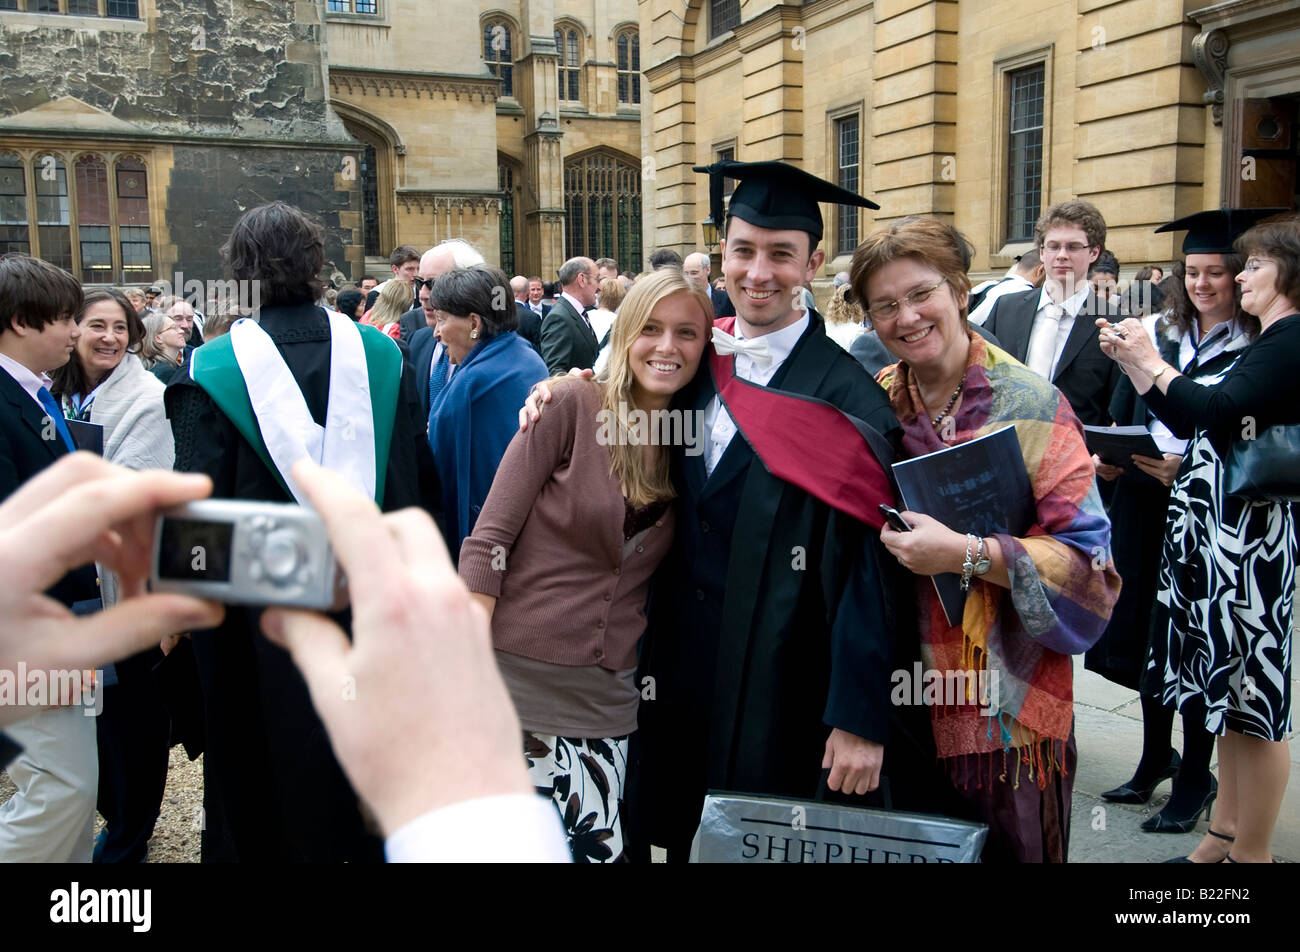 Degree ceremony at Oxford University and lots of smiling faces Stock